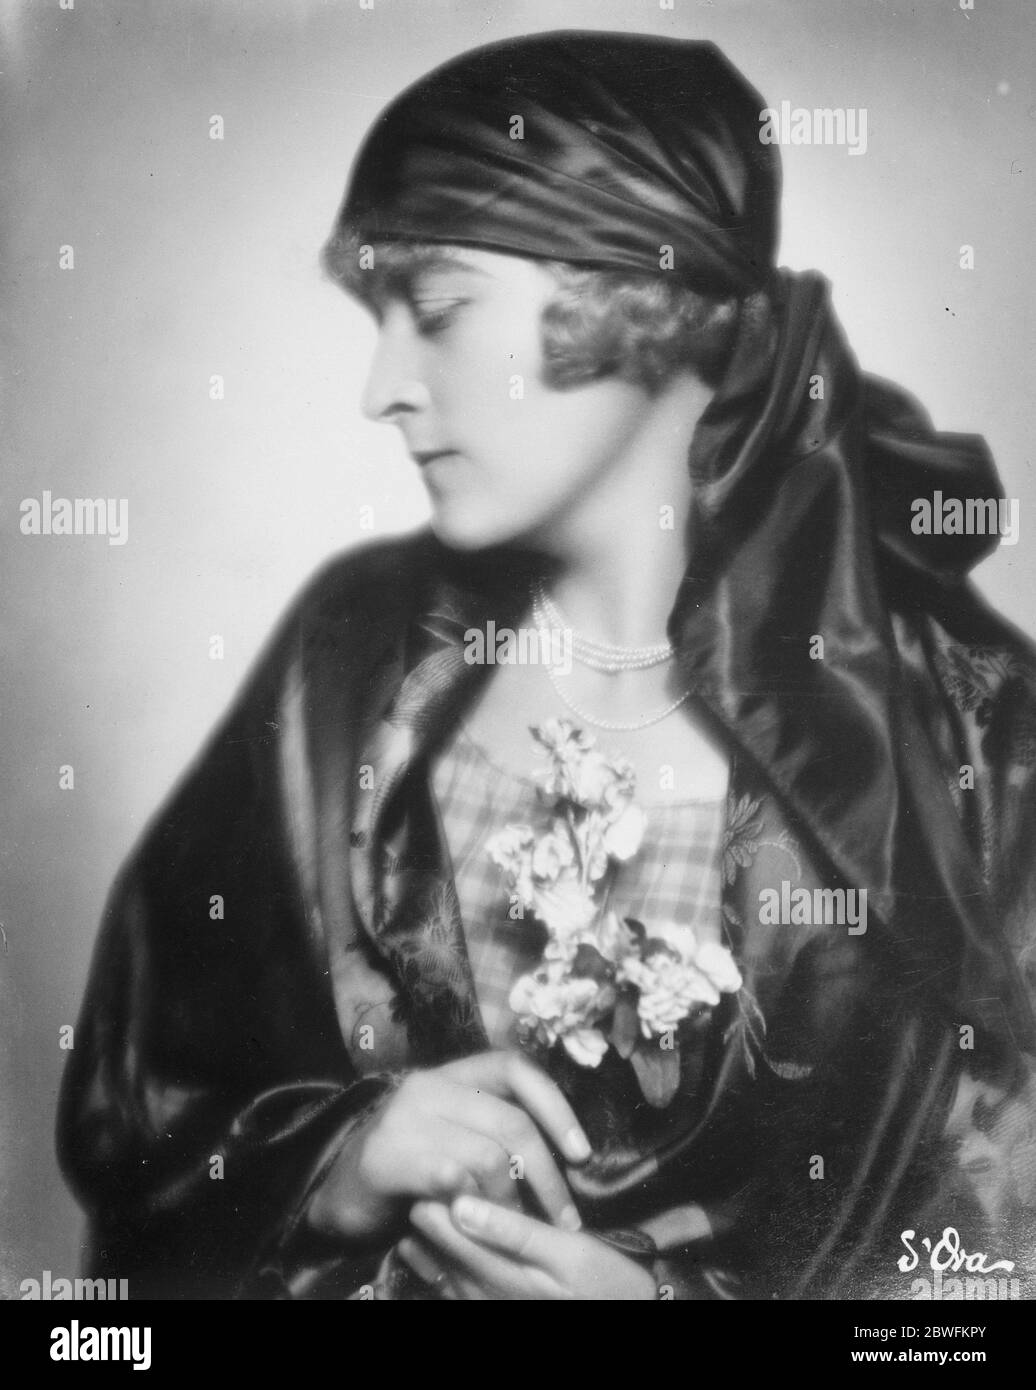 Profile on coinage . Mme Berta Braun , a Society woman , whose charming profile has been perpetuated in the new Austrian coinage . 14 December 1926 Stock Photo